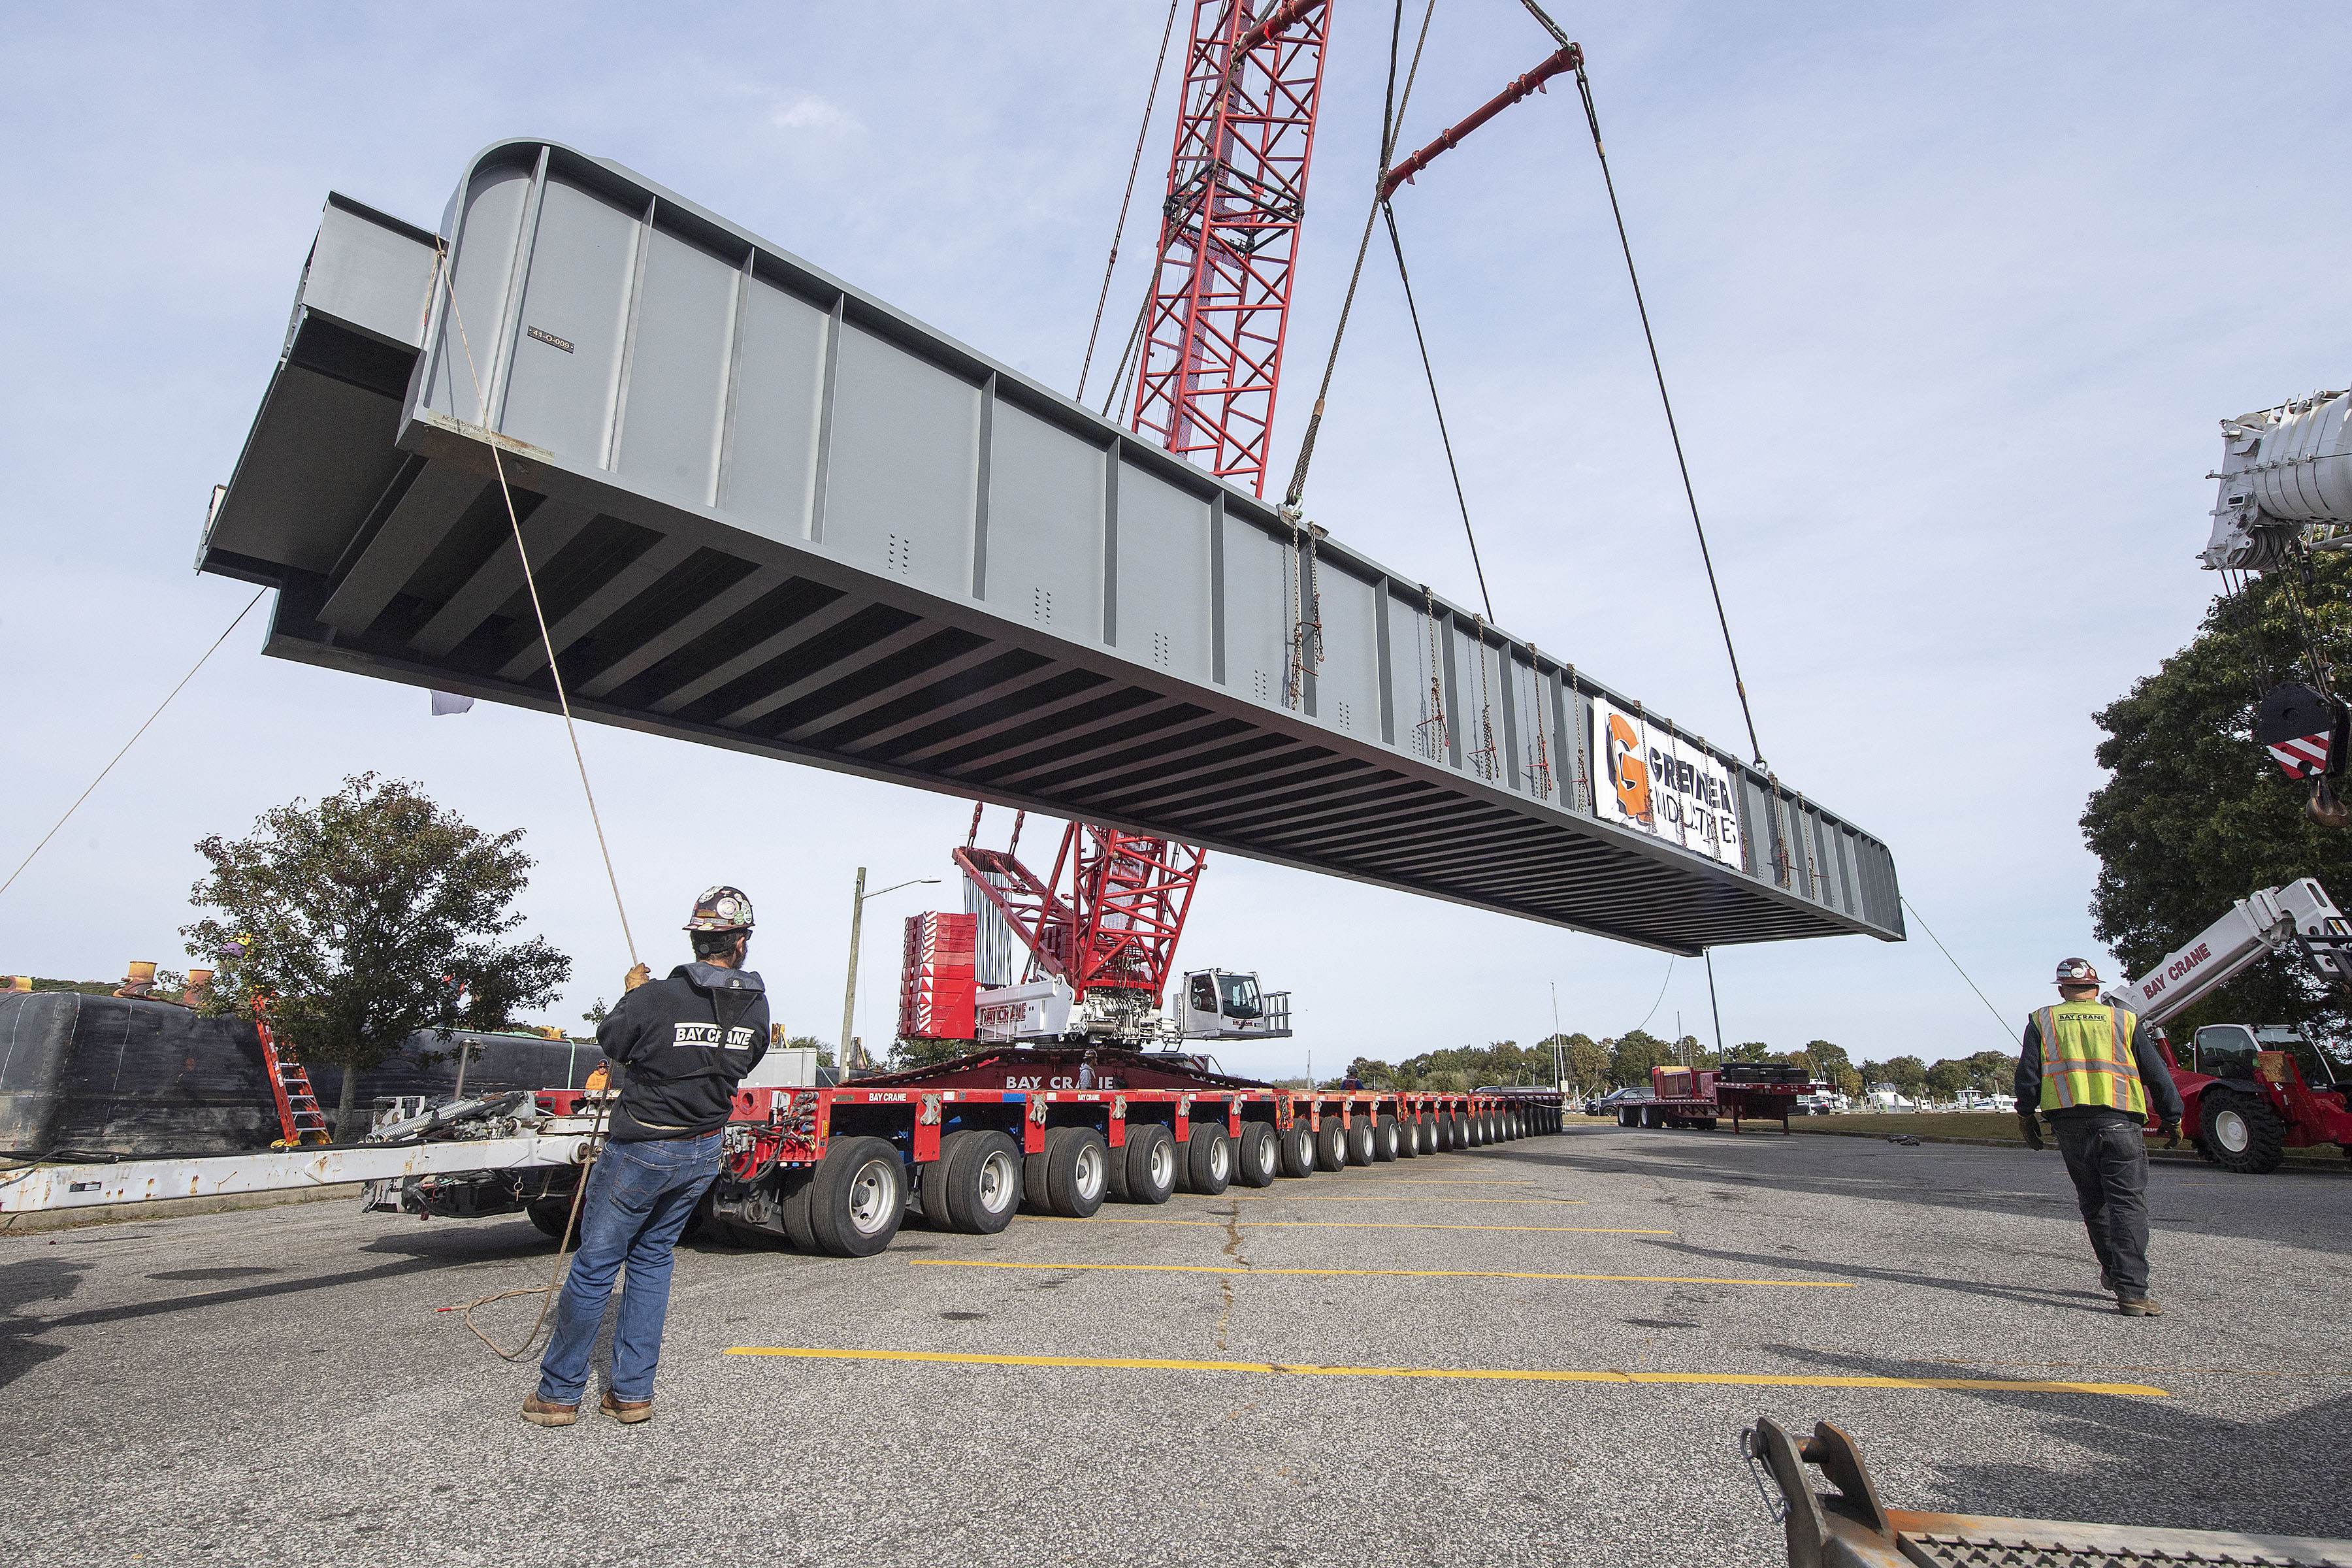 The new trestles were delivered through Shinnecock Inlet on Wednesday. They will be transported to East Hampton Village in the upcoming days. MICHAEL HELLER